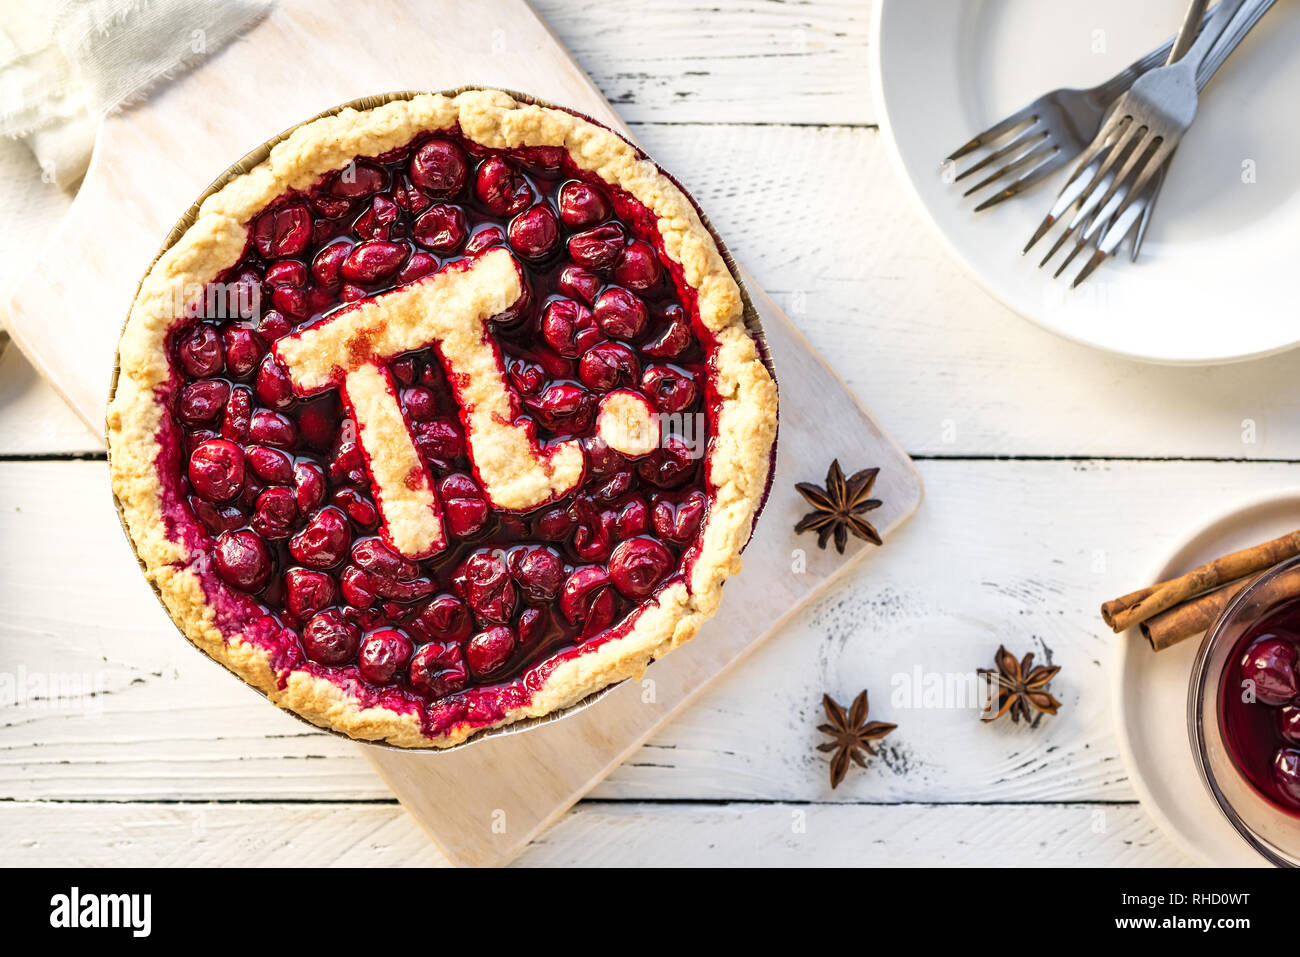 Pi Day Cherry Pie - Homemade Traditional Cherry Pie with Pi sign for March 14th holiday. Stock Photo